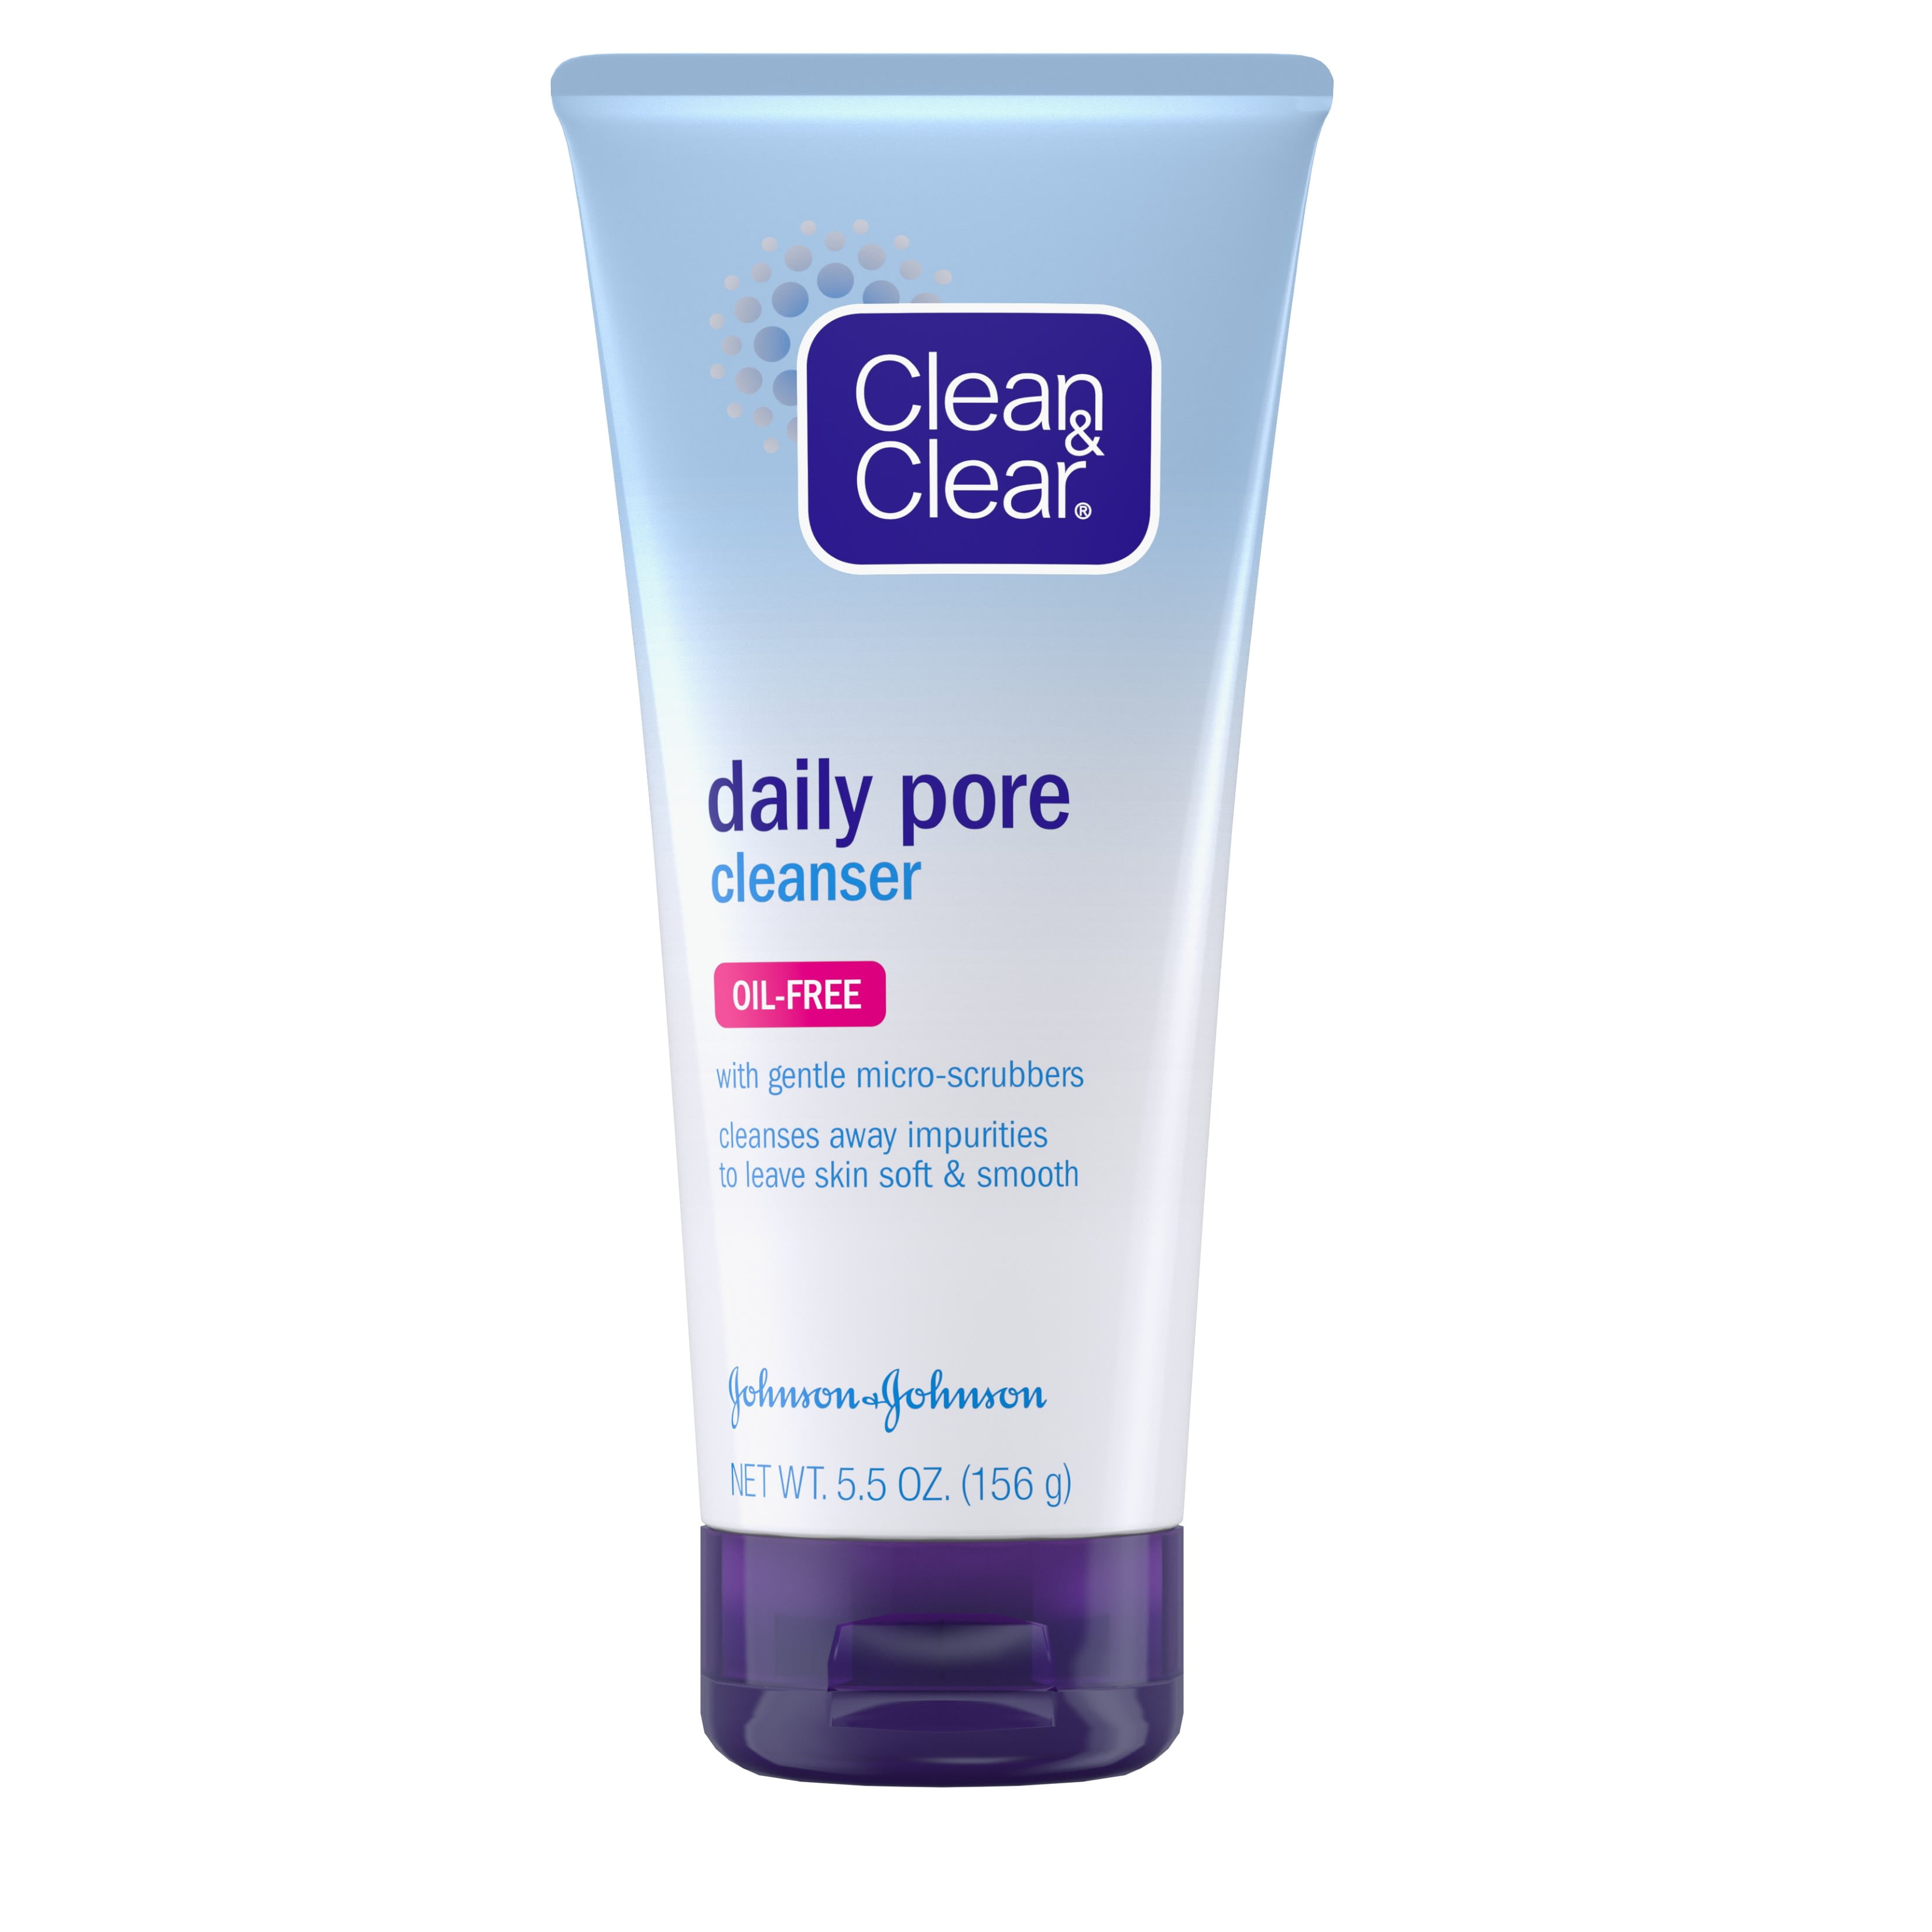 Clean & Clear Daily Pore Facial Cleanser for Soft, Smooth Skin, Oil-Free Acne Face Wash for Normal, Oily & Combination Skin Care, 5.5 oz